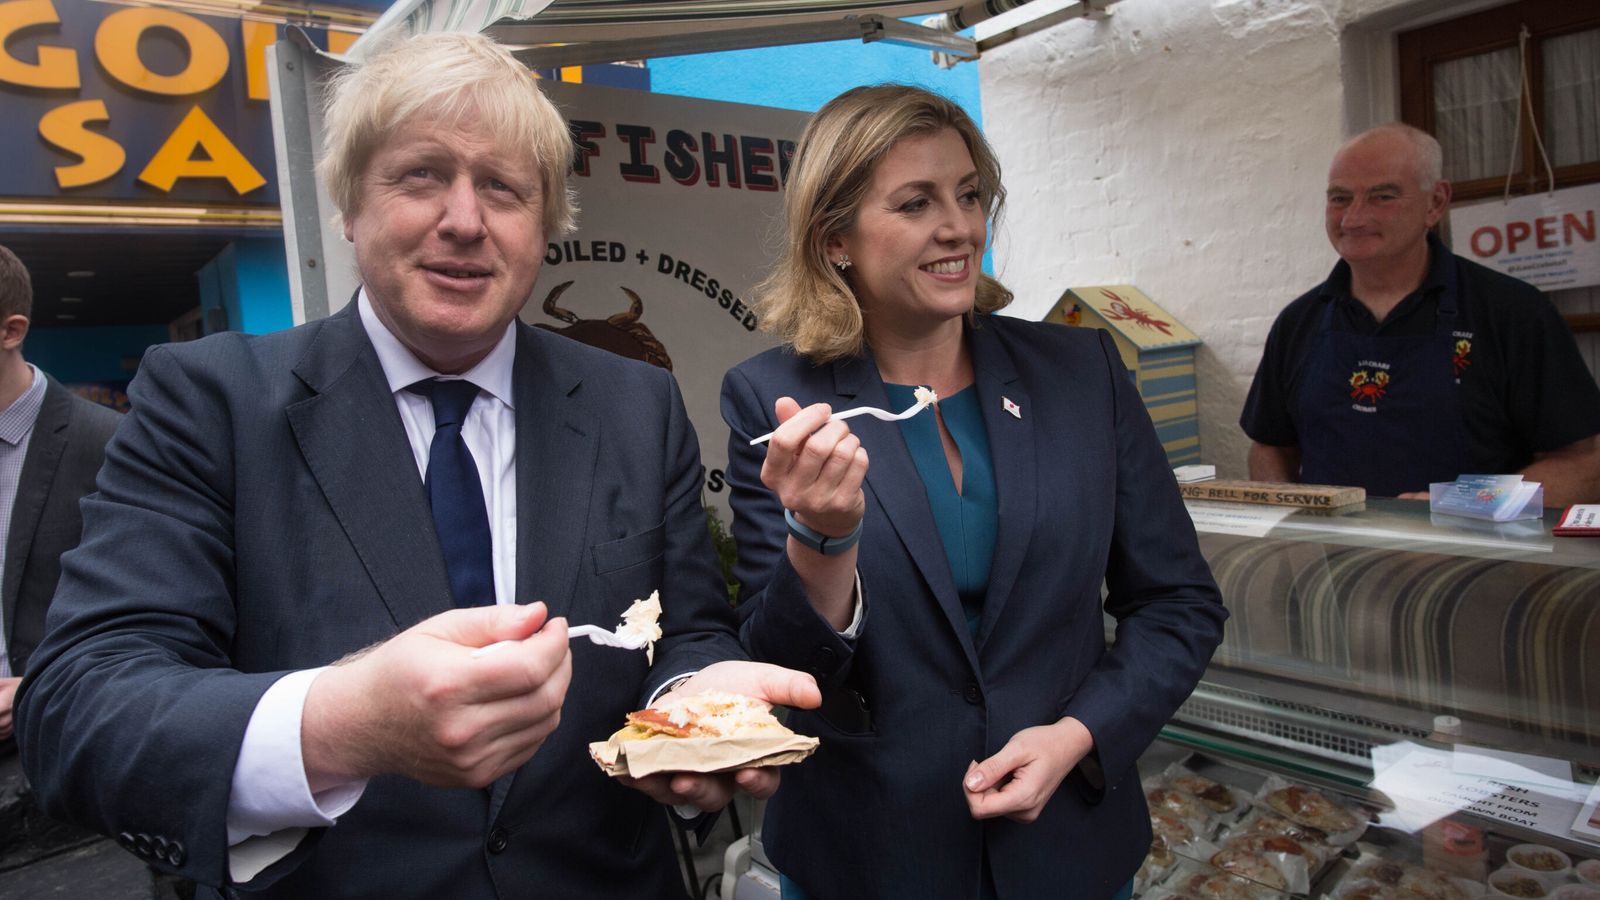 Penny Mordaunt rejects Boris Johnson as he calls for her backing, sources claim